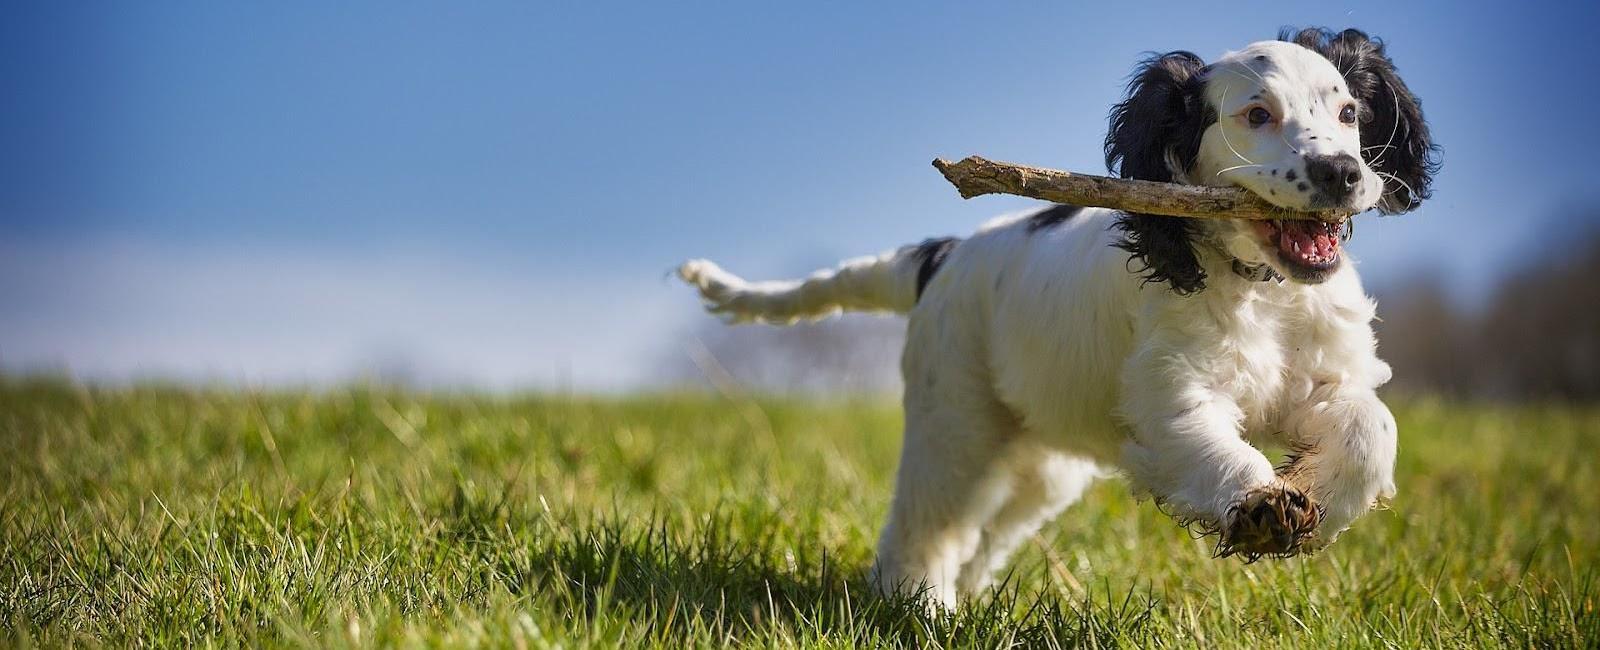 Your Dog Stopped Doing Tricks? The Essential Tips for Getting Your Pup Back on Track